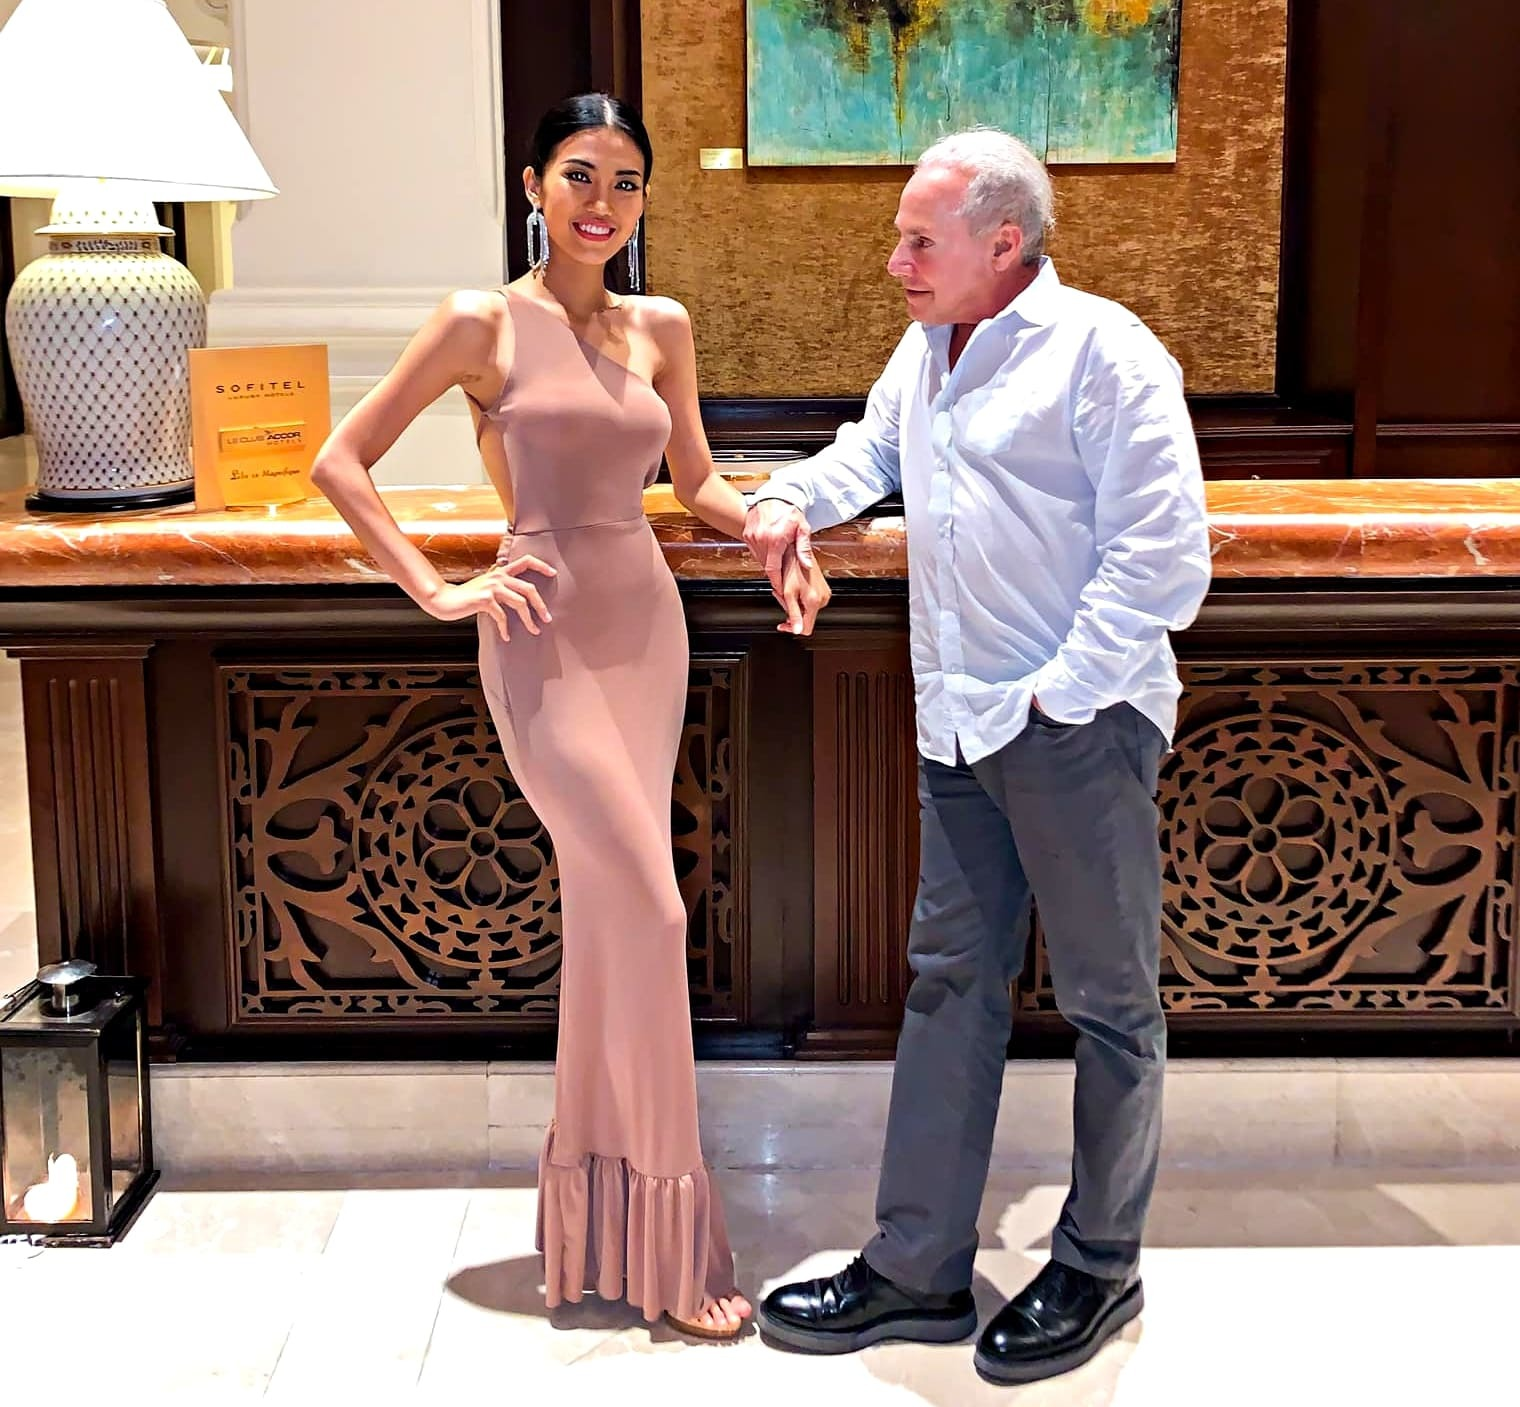 26-year-old Vietnamese girl and 72-year-old American CEO in a Luxurious Wedding